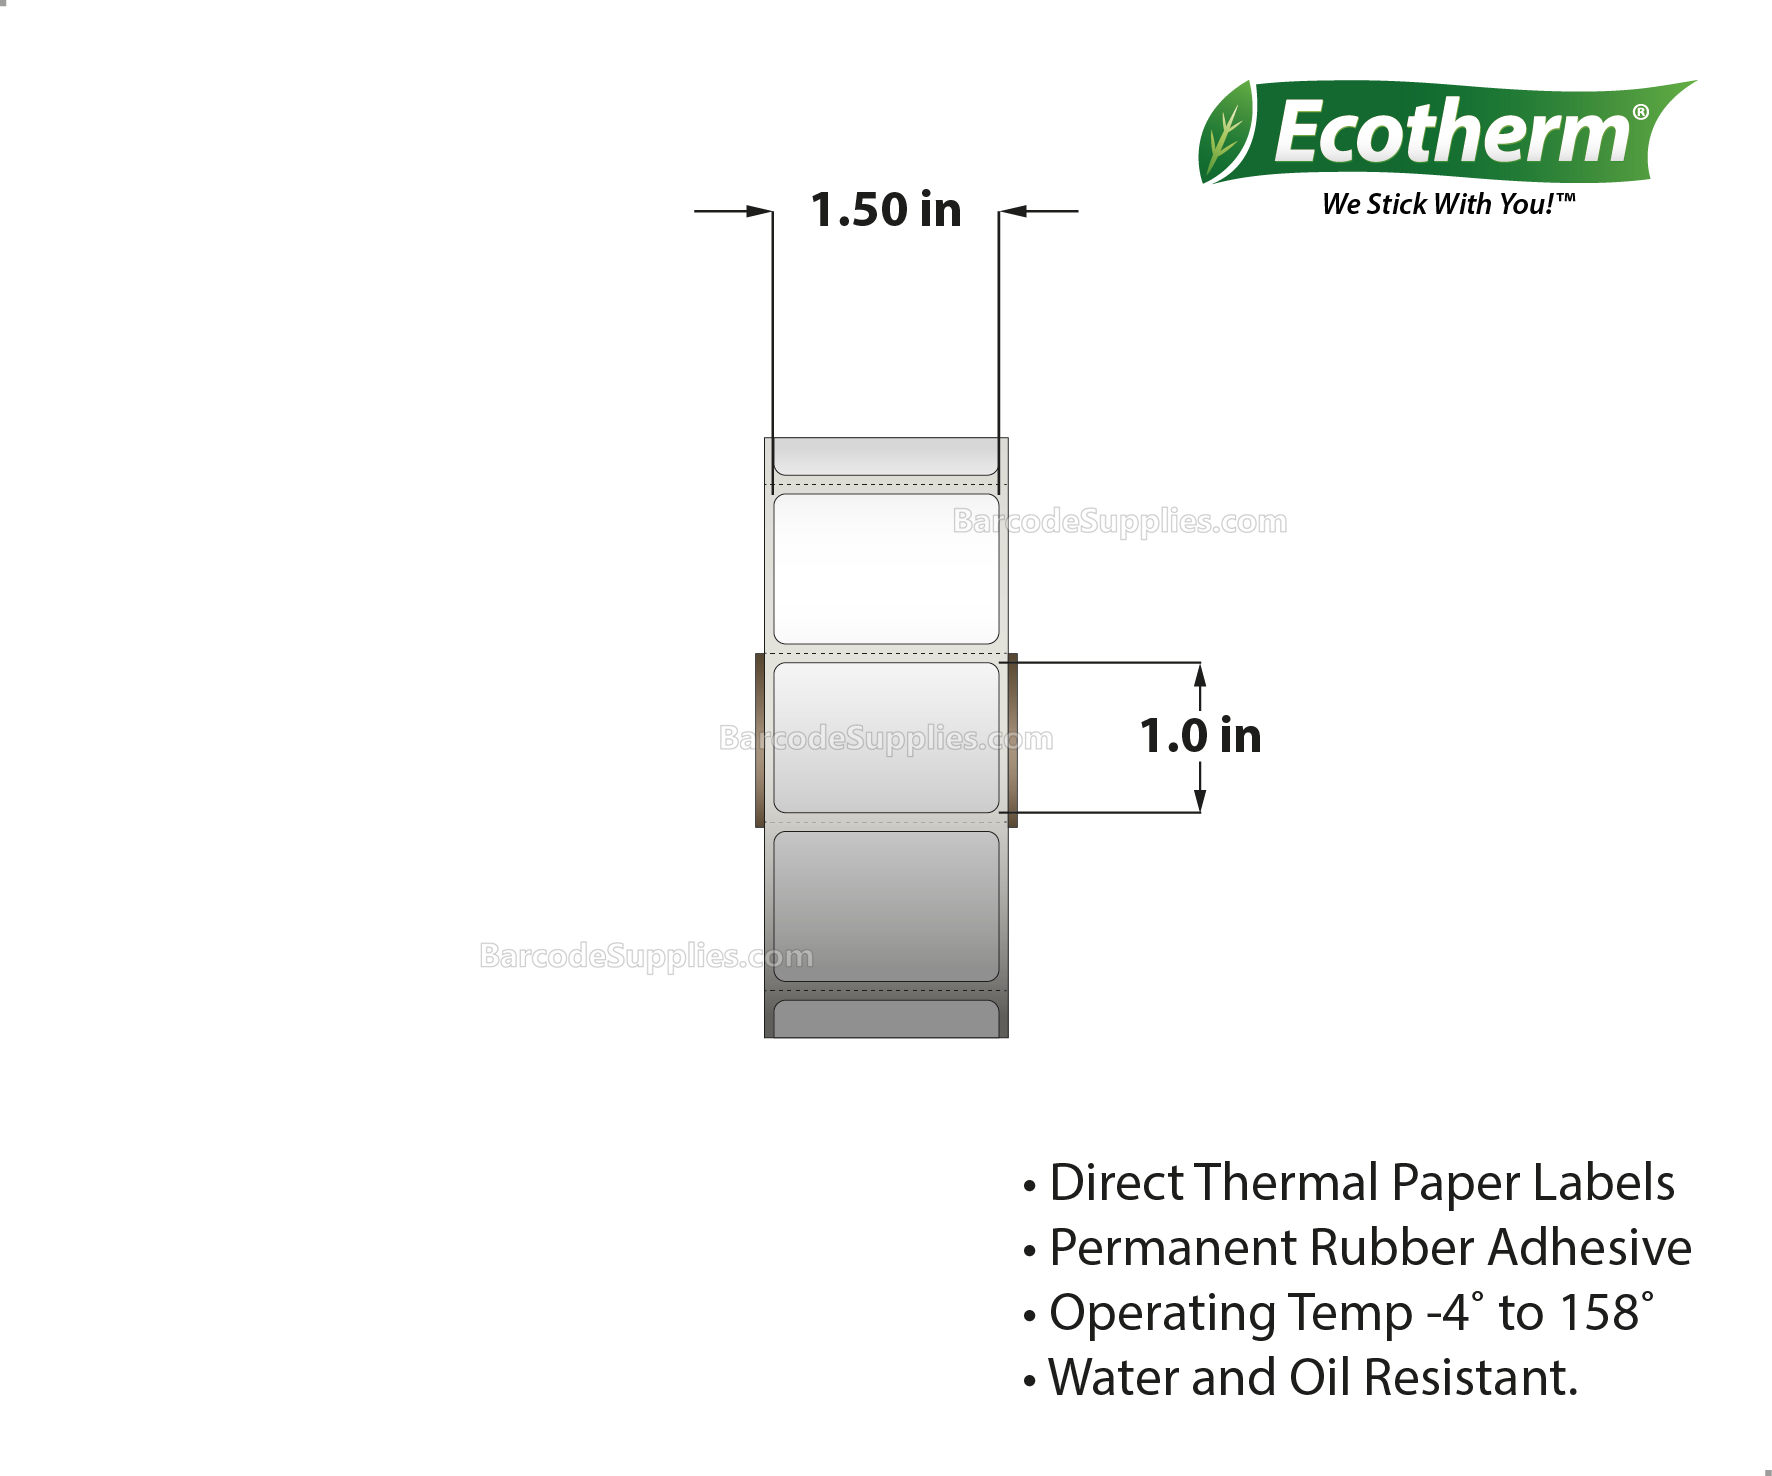 1.5 x 1 Direct Thermal White Labels With Rubber Adhesive - Perforated - 1325 Labels Per Roll - Carton Of 4 Rolls - 5300 Labels Total - MPN: ECOTHERM14119-4